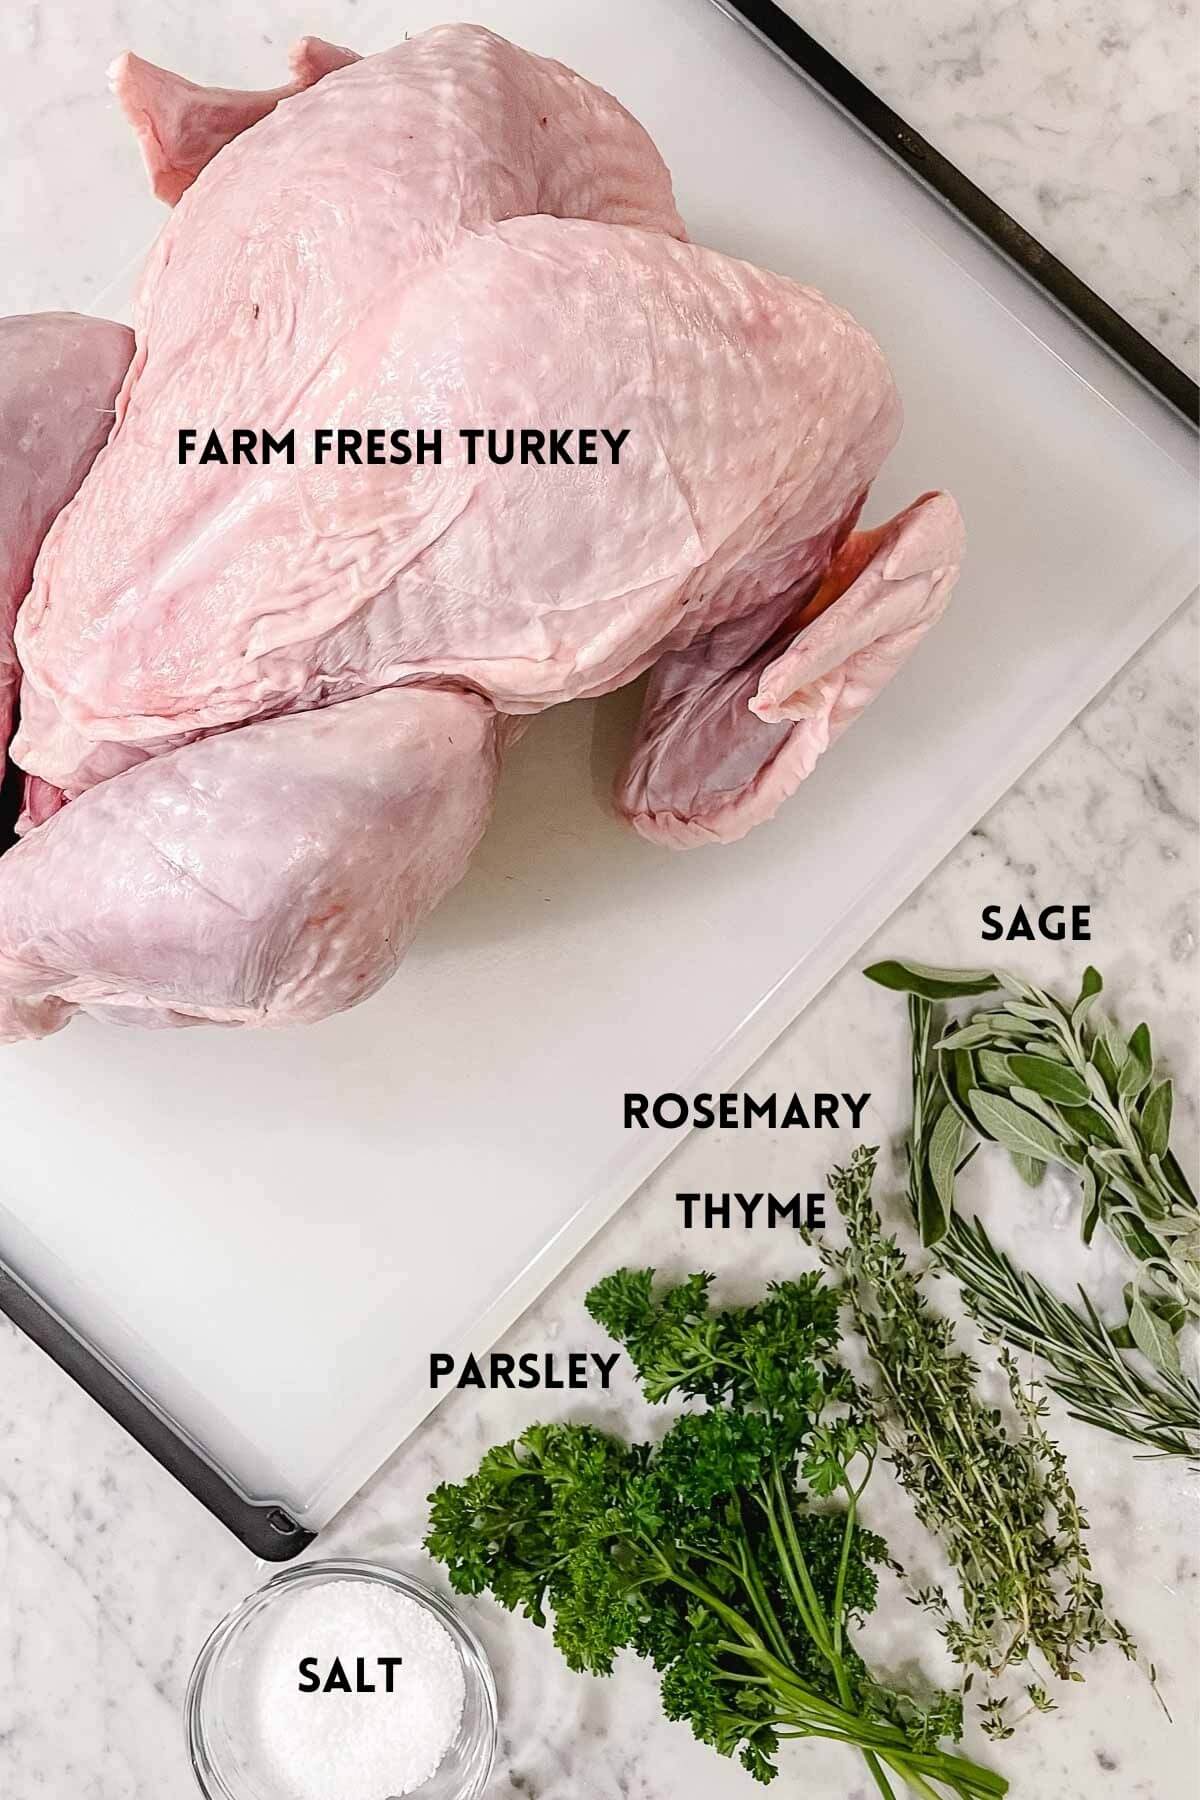 Ingredients needed for making a smoked turkey including a whole turkey, herbs, and salt